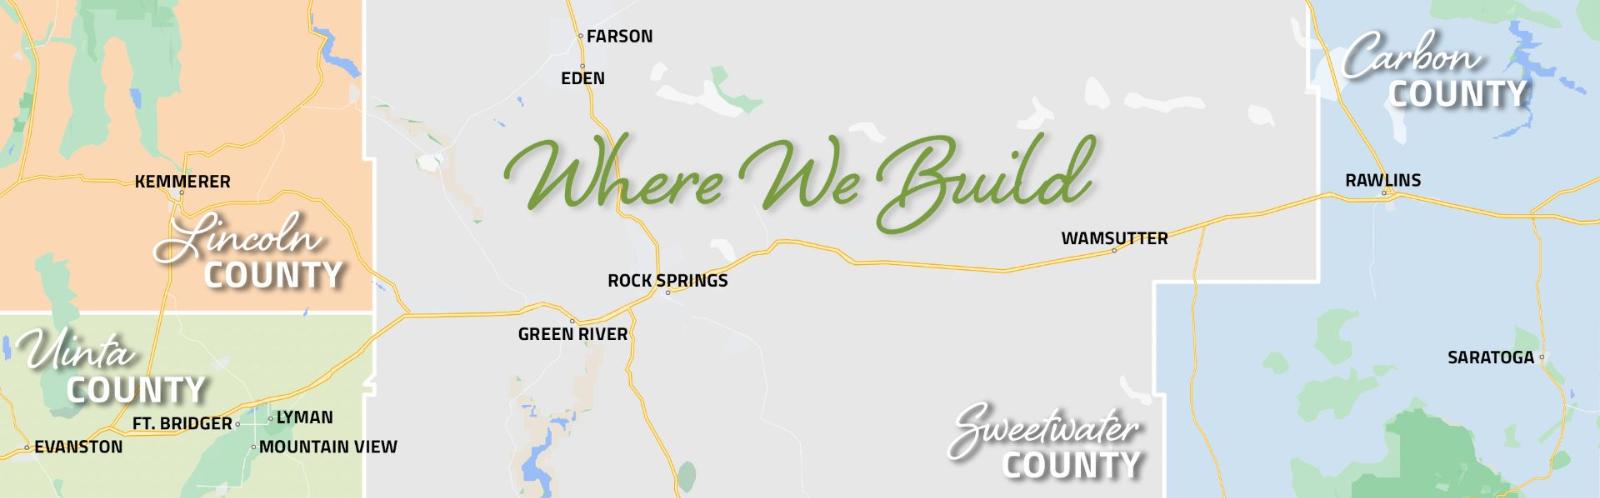 A map from Smart Dwellings' website showing the areas where they build in southwestern Wyoming. The map highlights Uinta, Lincoln, Sweetwater, and Carbon counties. Key towns include Evanston, Kemmerer, Ft. Bridger, Lyman, Mountain View, Rock Springs, Green River, Wamsutter, Rawlins, and Saratoga. The text "Where We Build" is prominently displayed in the center.